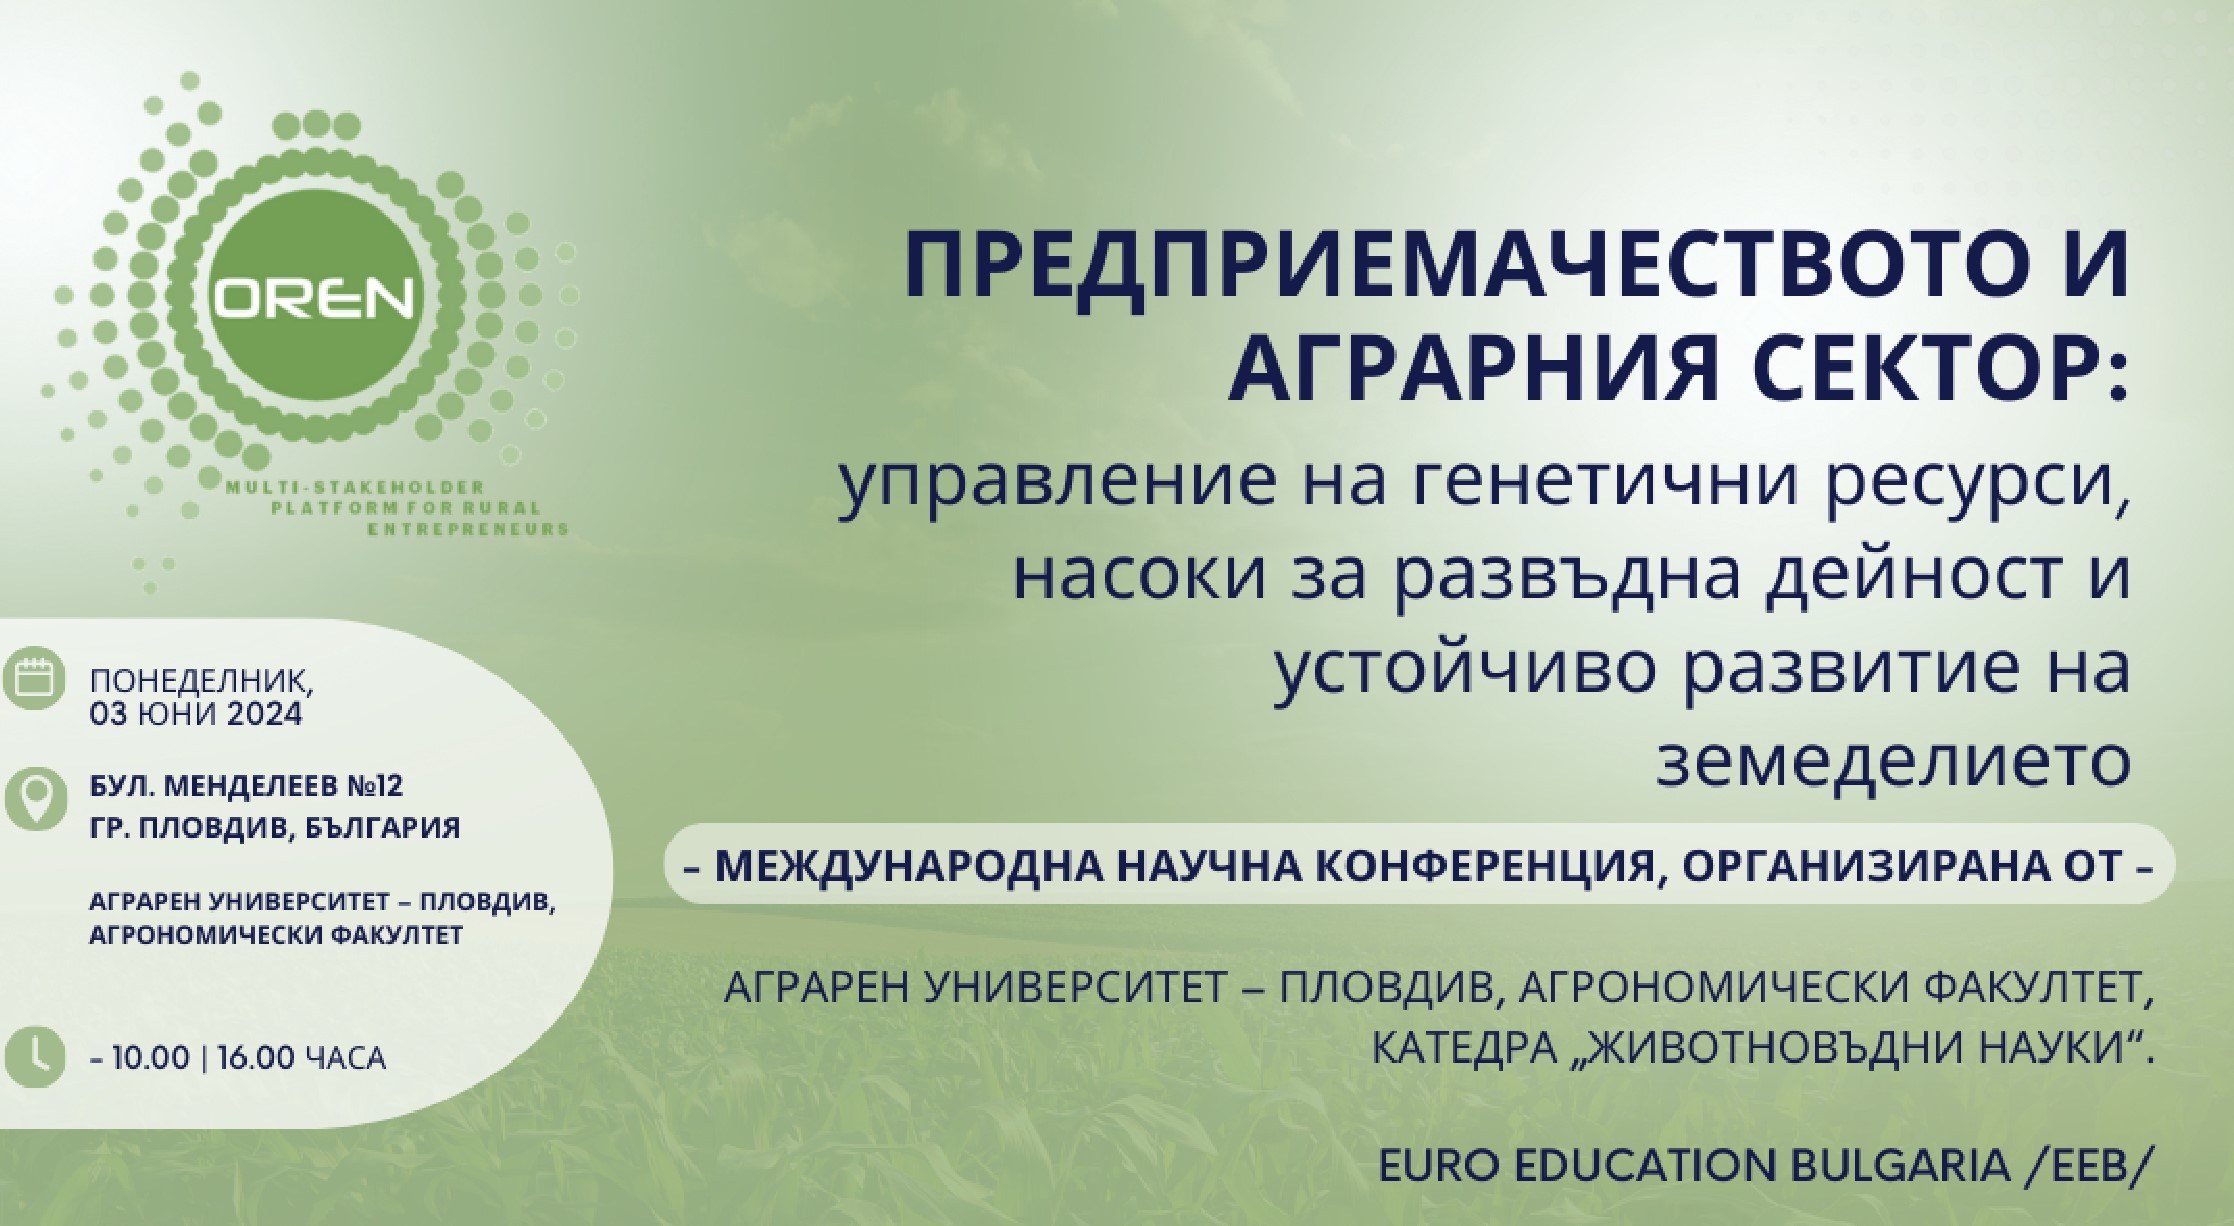 International scientific conference organized by Department of Animal sciences at Agricultural university - Plovdiv